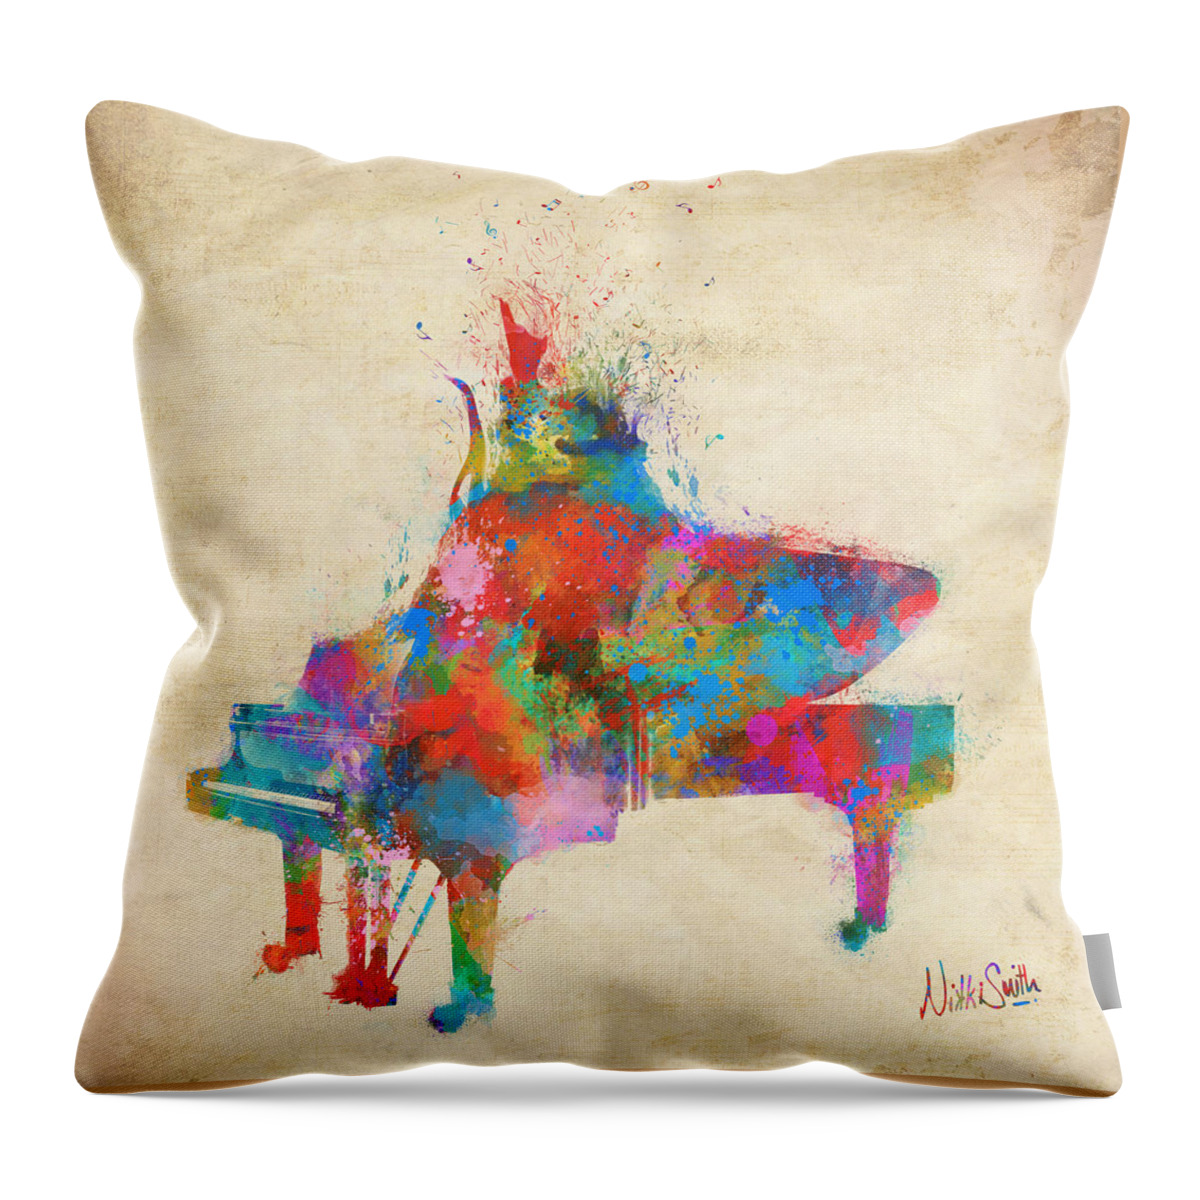 Piano Throw Pillow featuring the digital art Music Strikes Fire from the Heart by Nikki Marie Smith